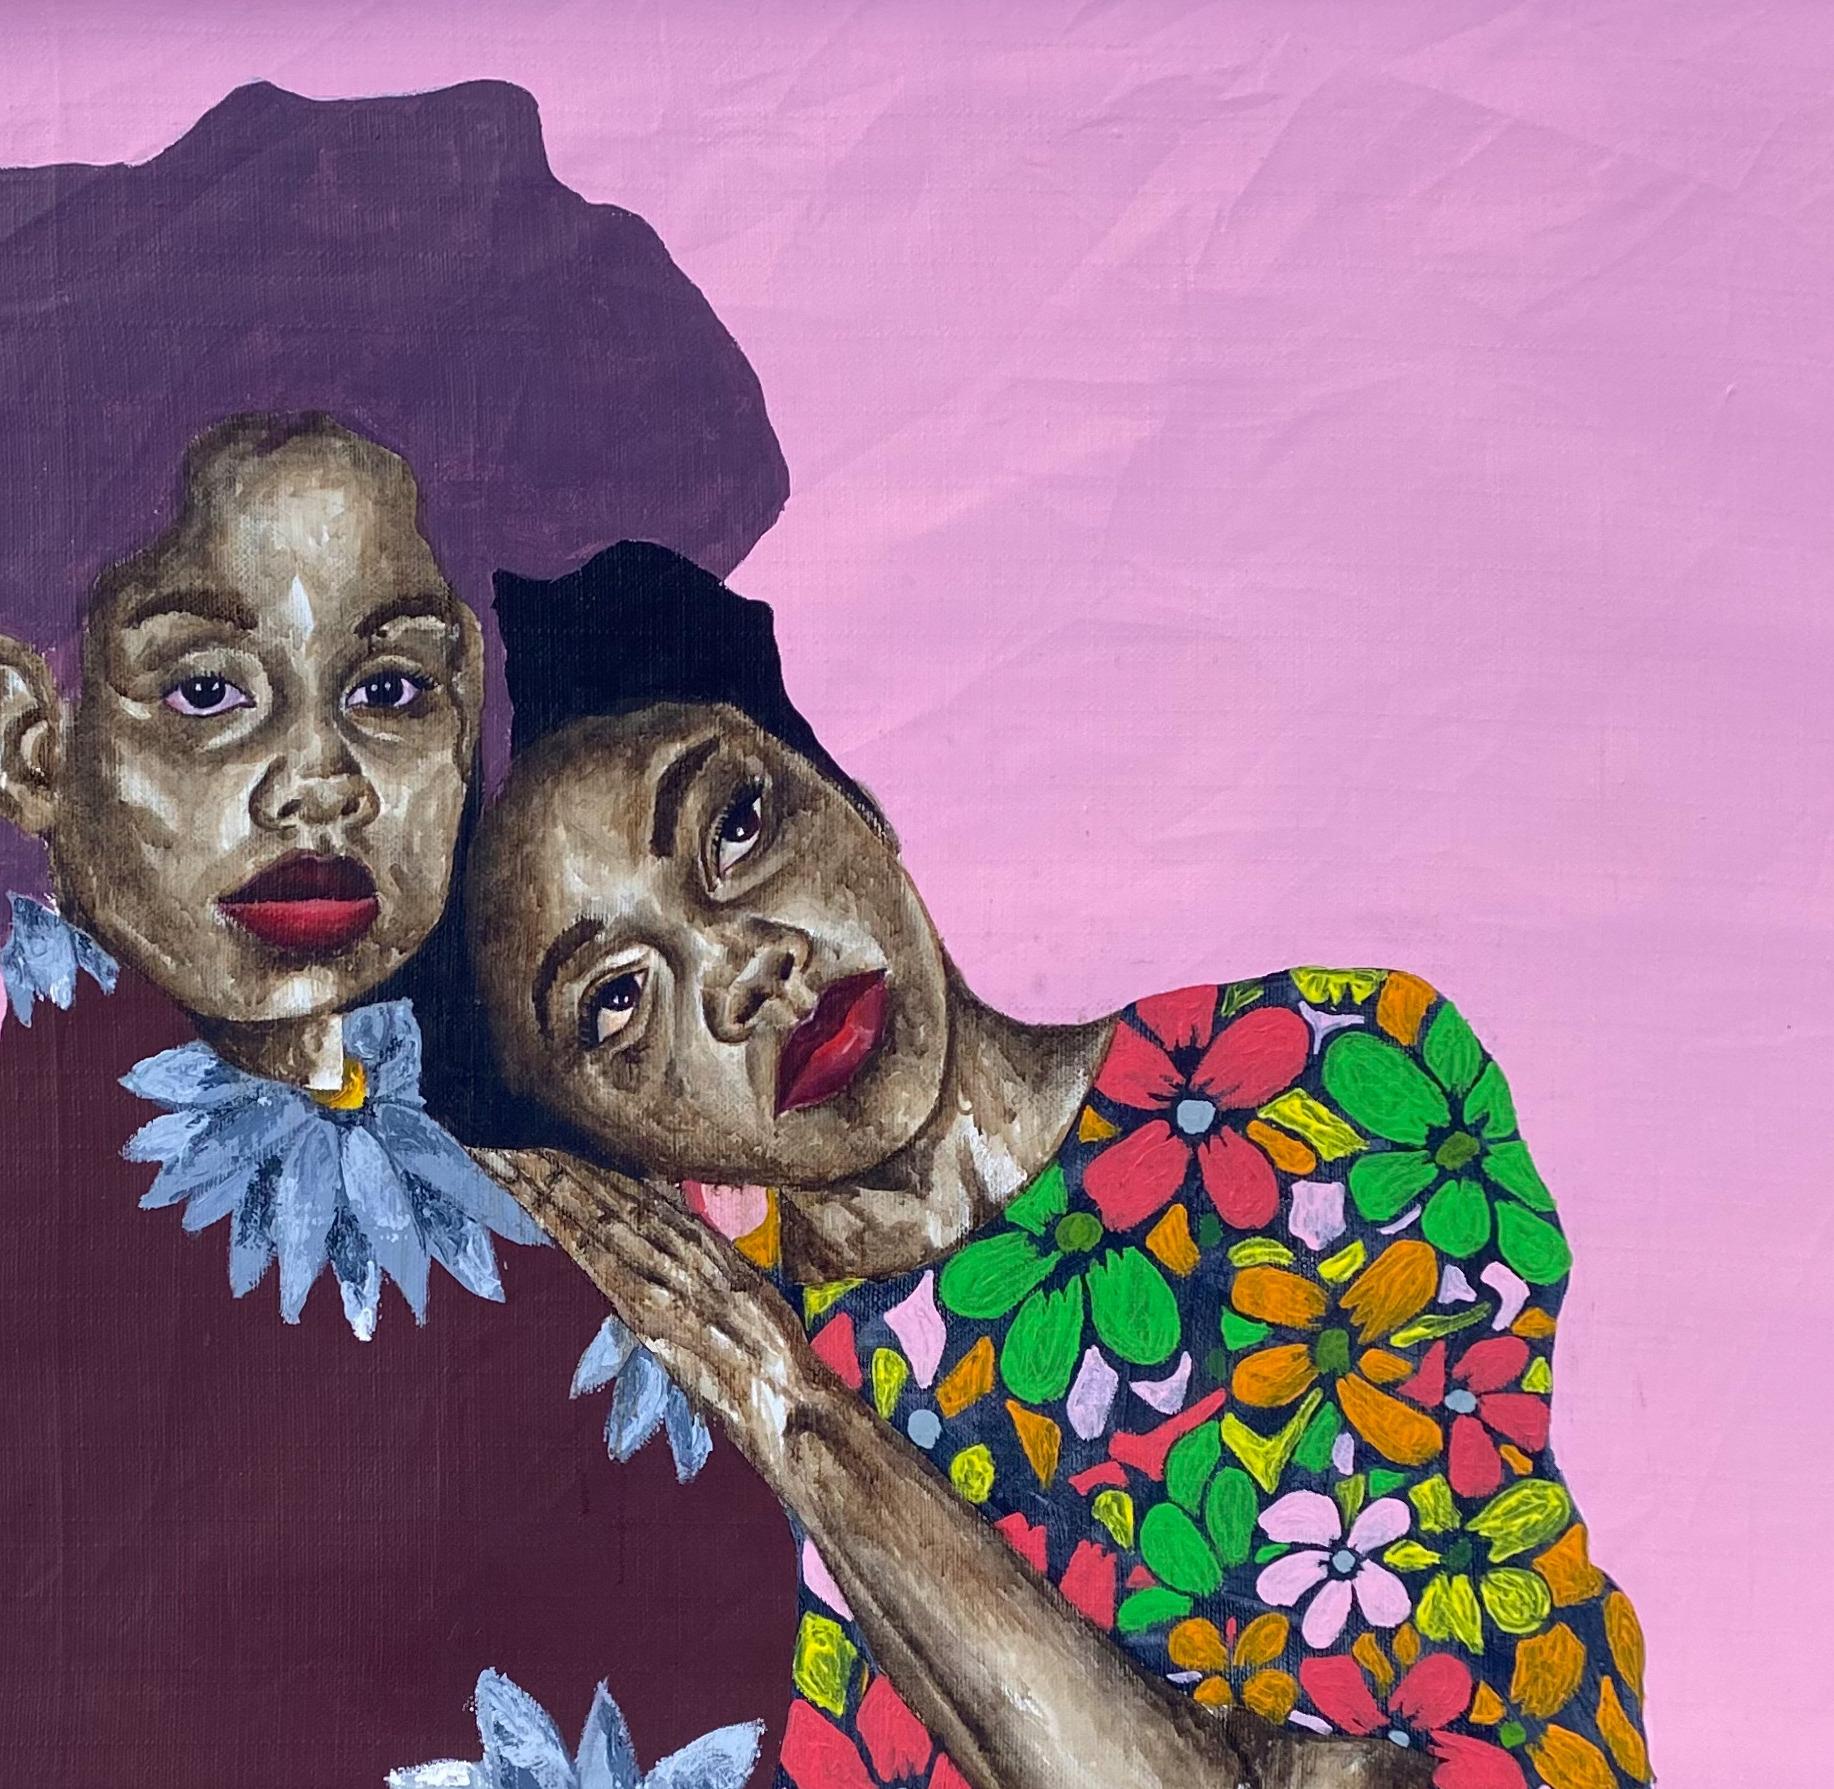 You and Me 1 - Contemporary Painting by Emmanuel Ojebola